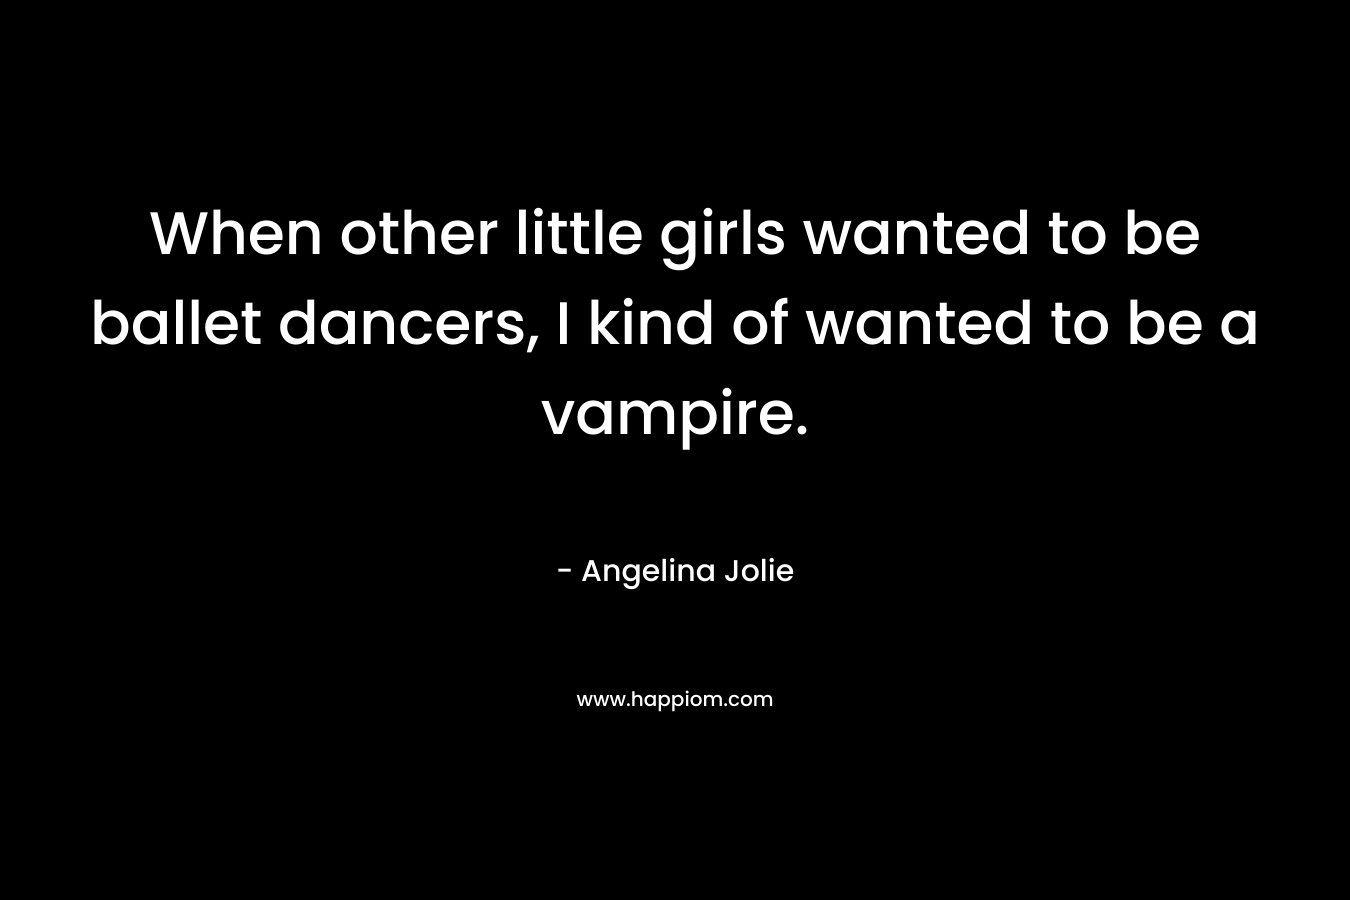 When other little girls wanted to be ballet dancers, I kind of wanted to be a vampire.